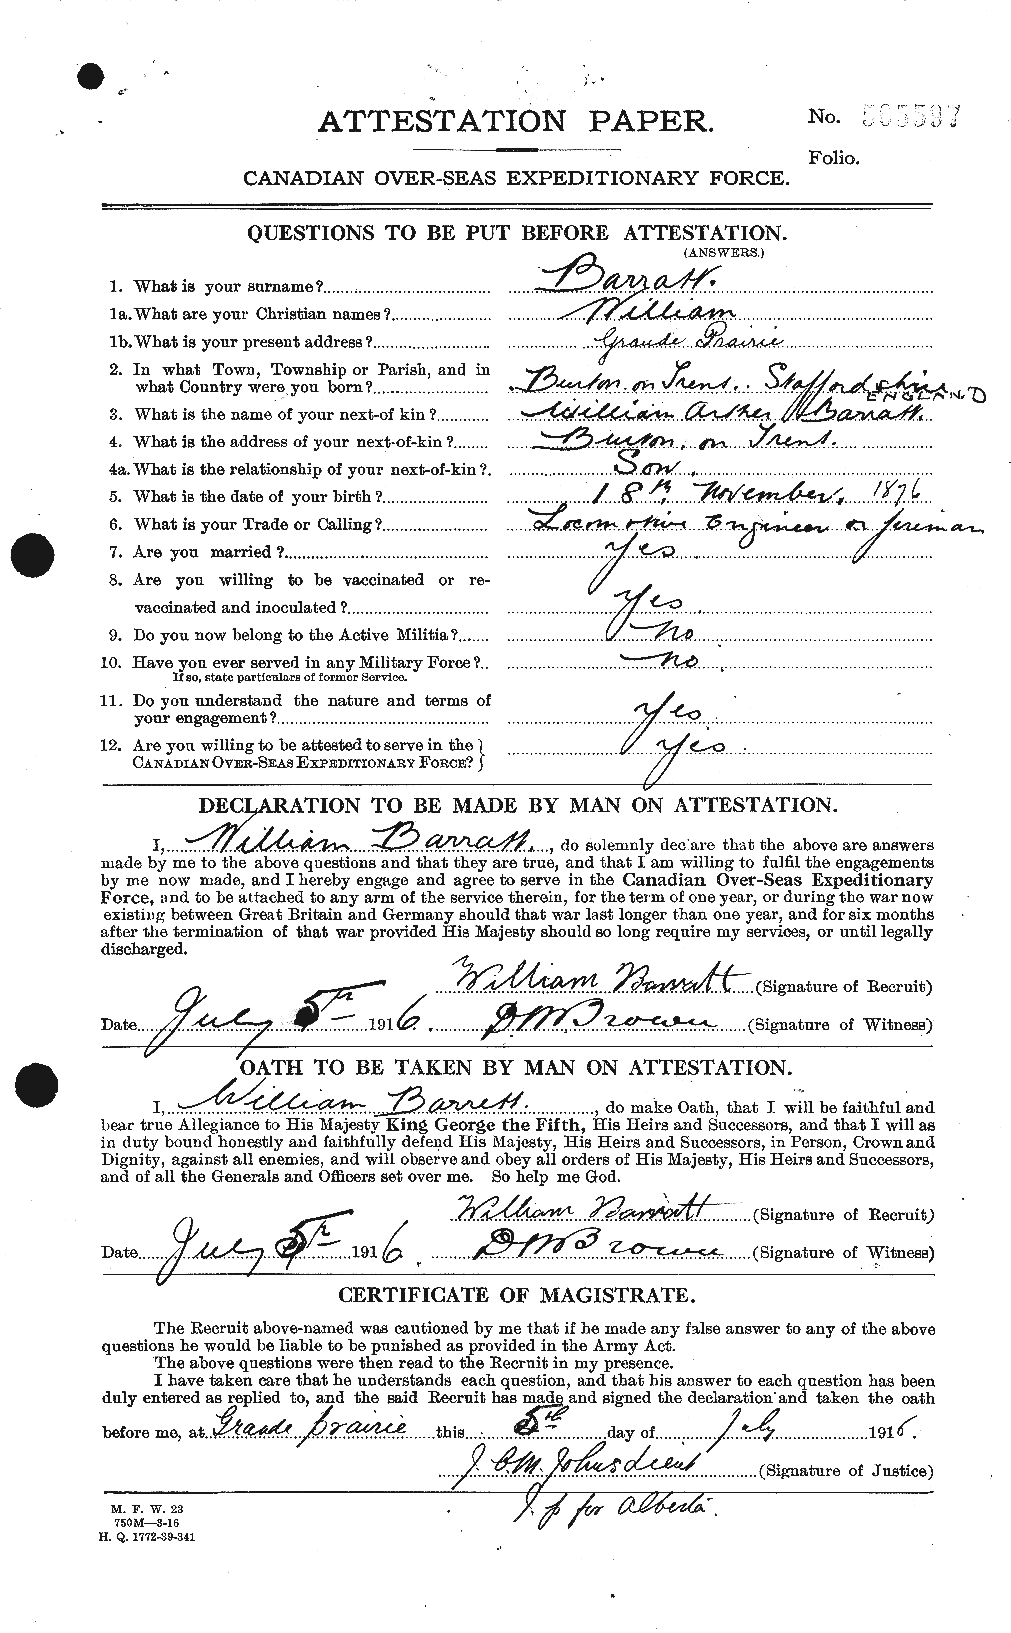 Personnel Records of the First World War - CEF 221956a